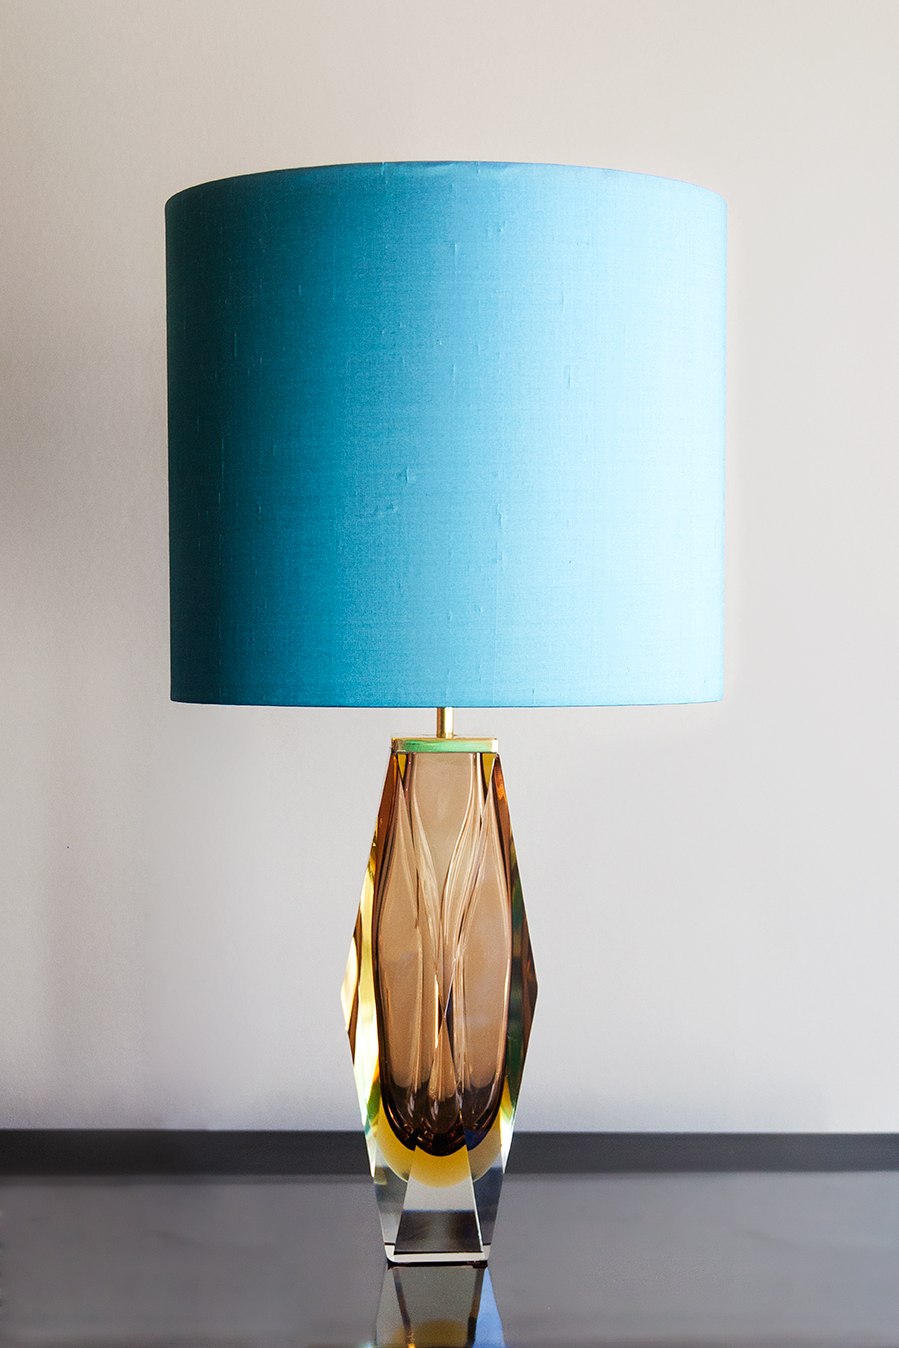 Sommerso Murano Glass Table Lamp